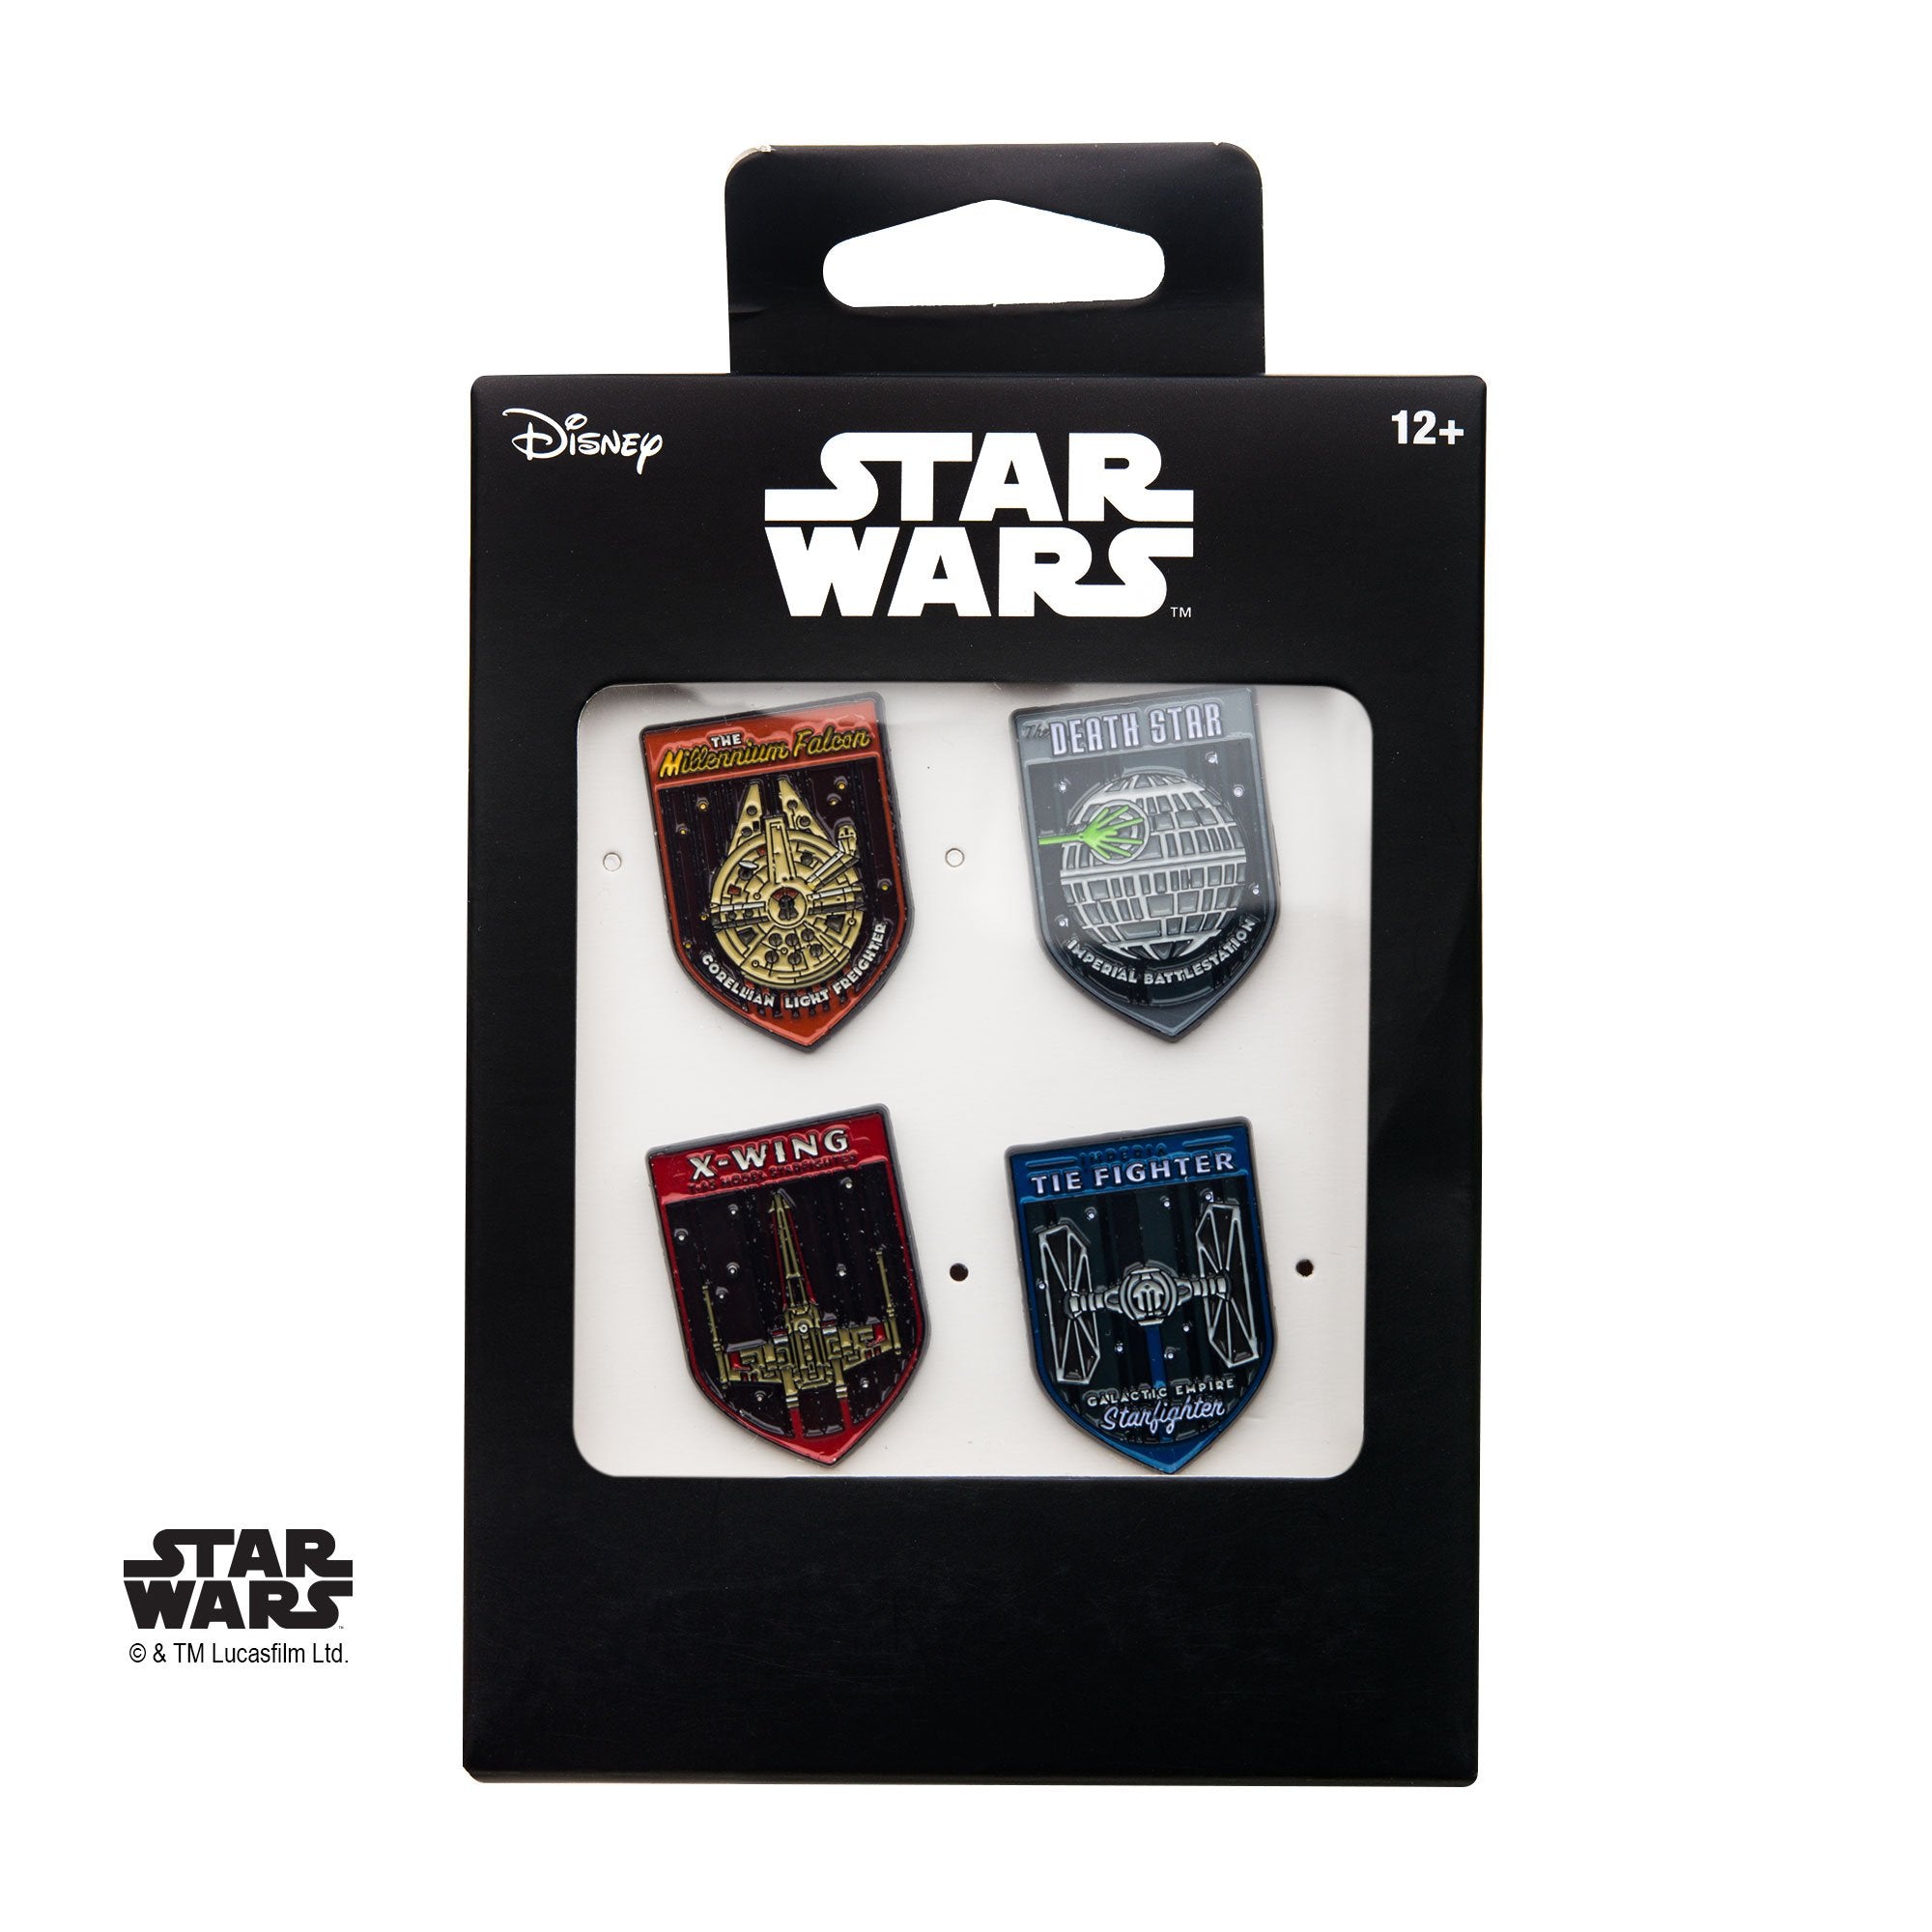 Star Wars Fighters Space Ships Base Metal Pin Set (4 piece)